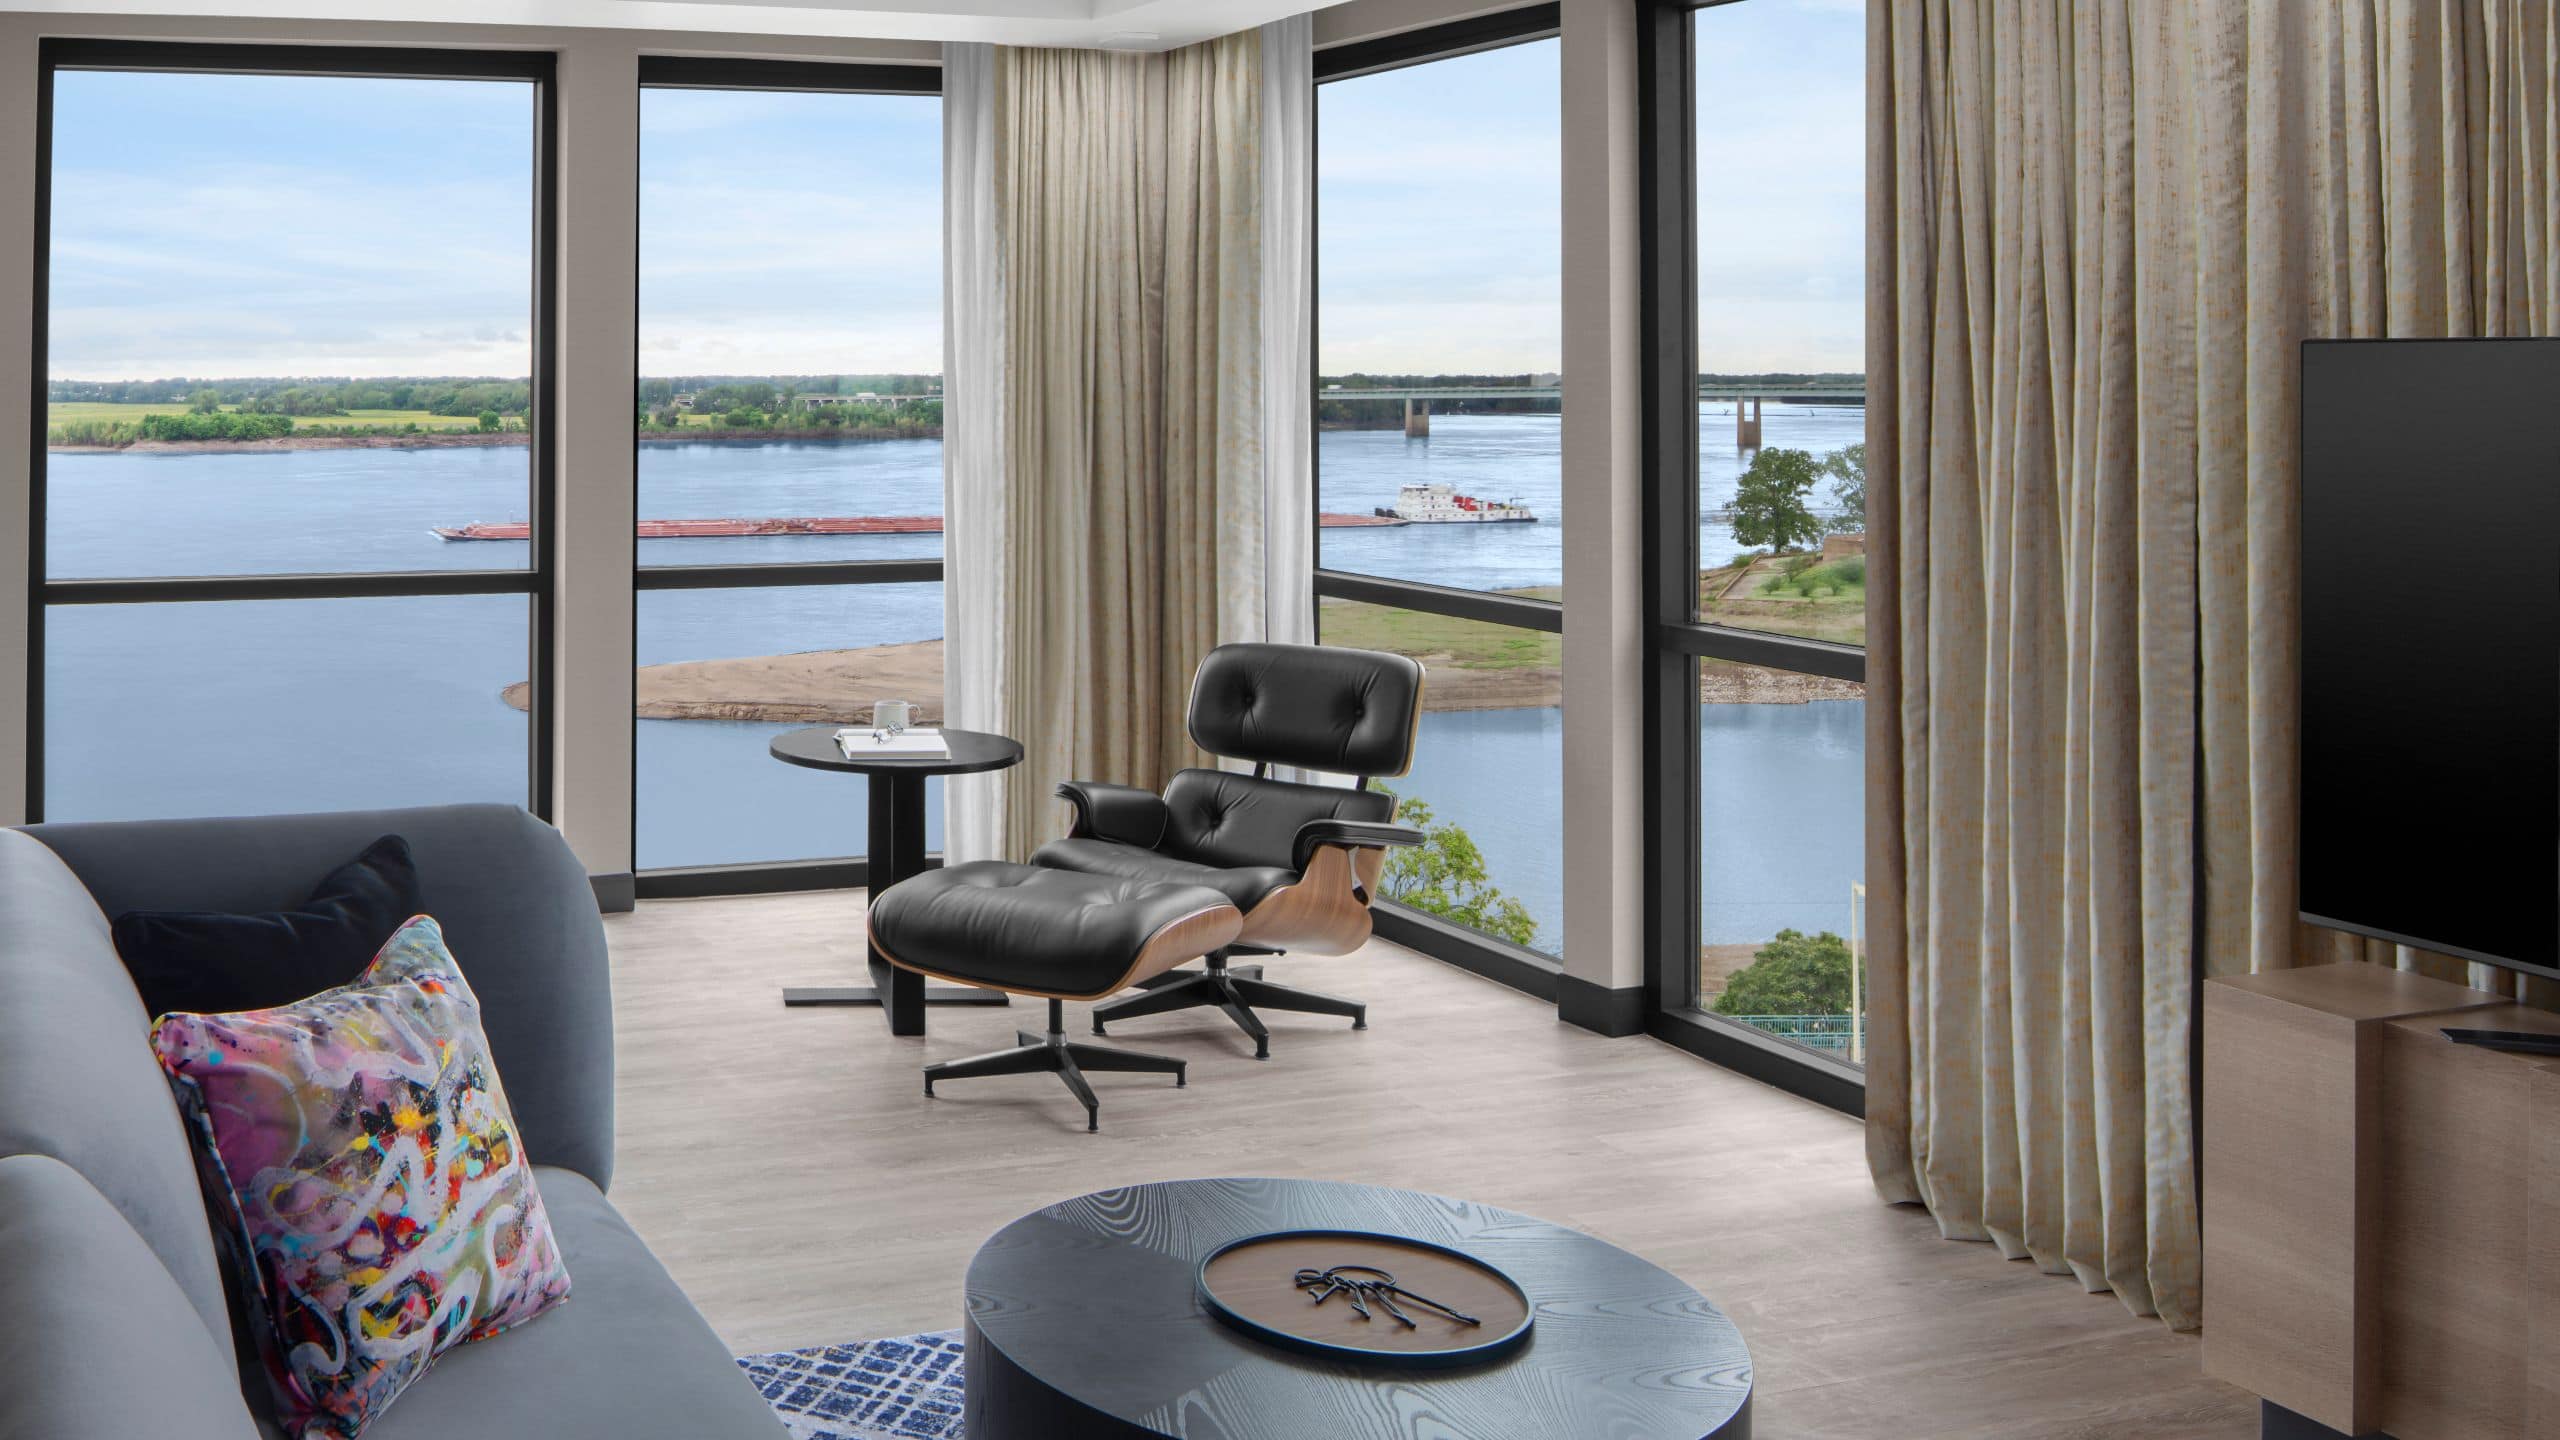 Premier Suite living room area with floor-to-ceiling views of the Mississippi River